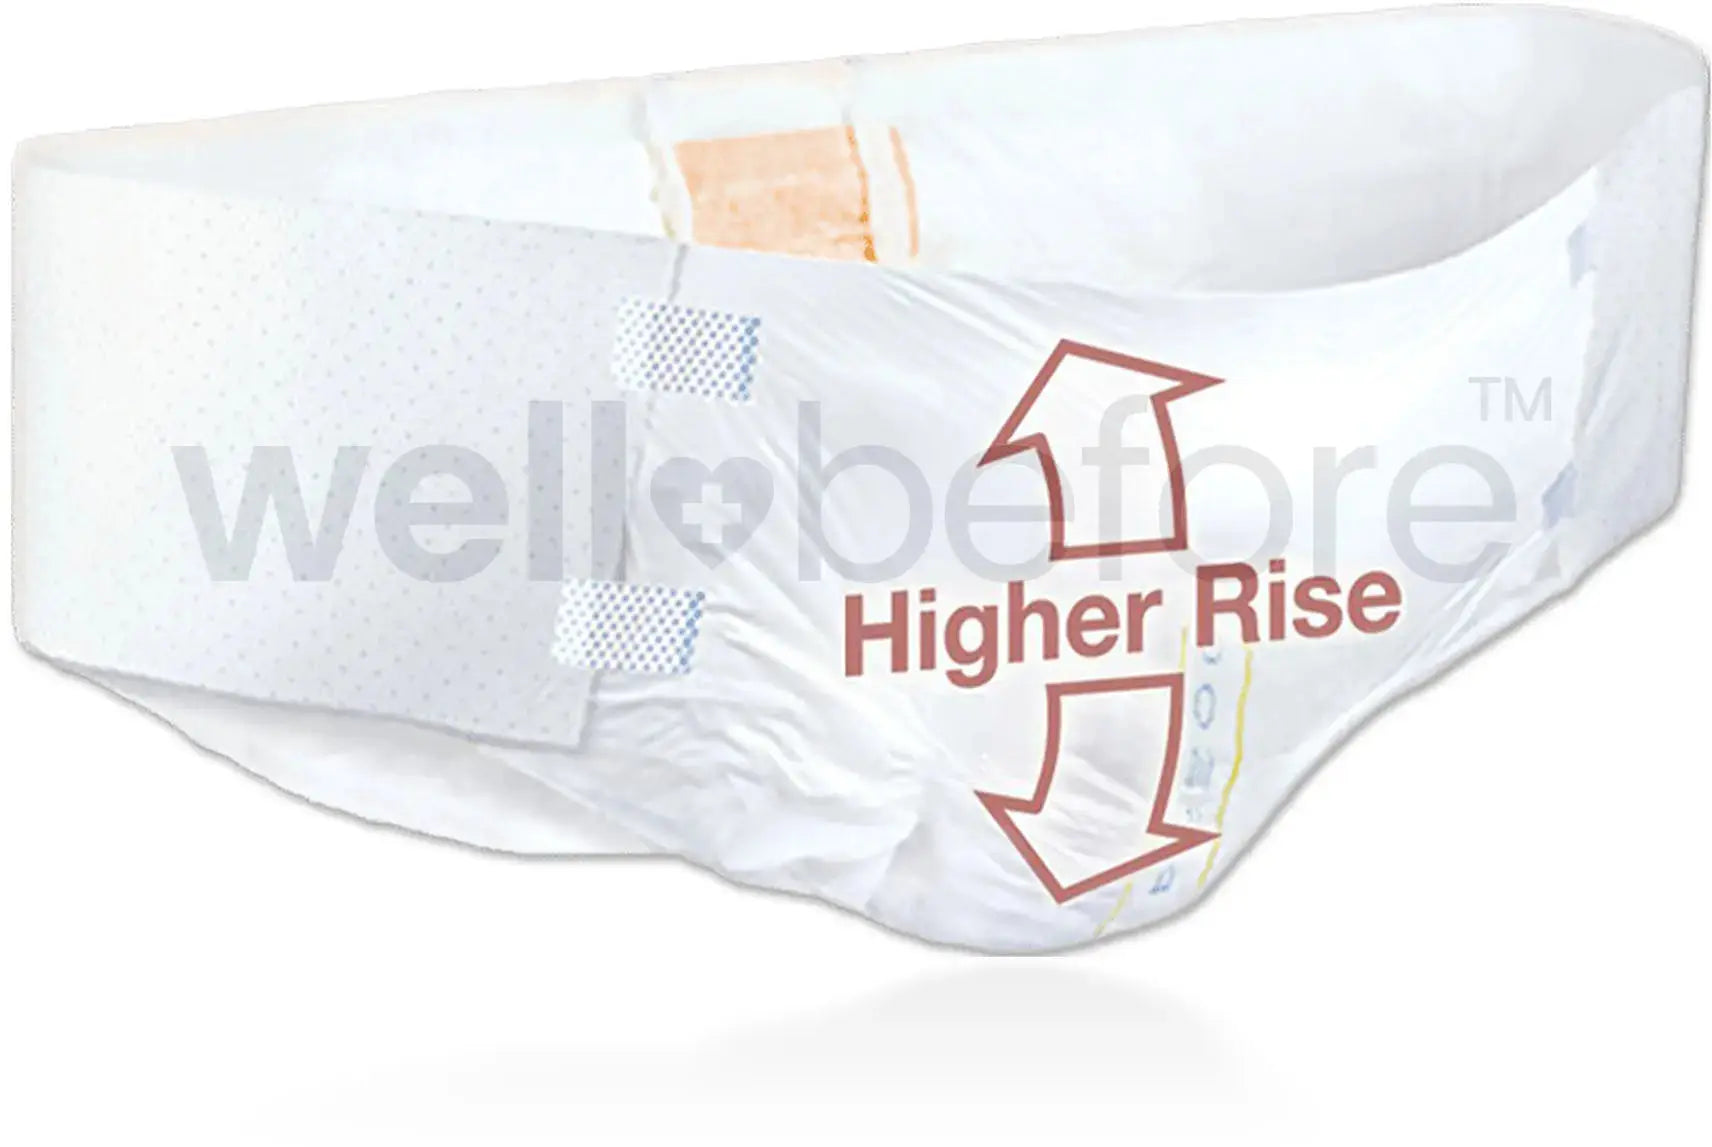 Tranquility AIR-Plus Bariatric Disposable Briefs - Tranquility